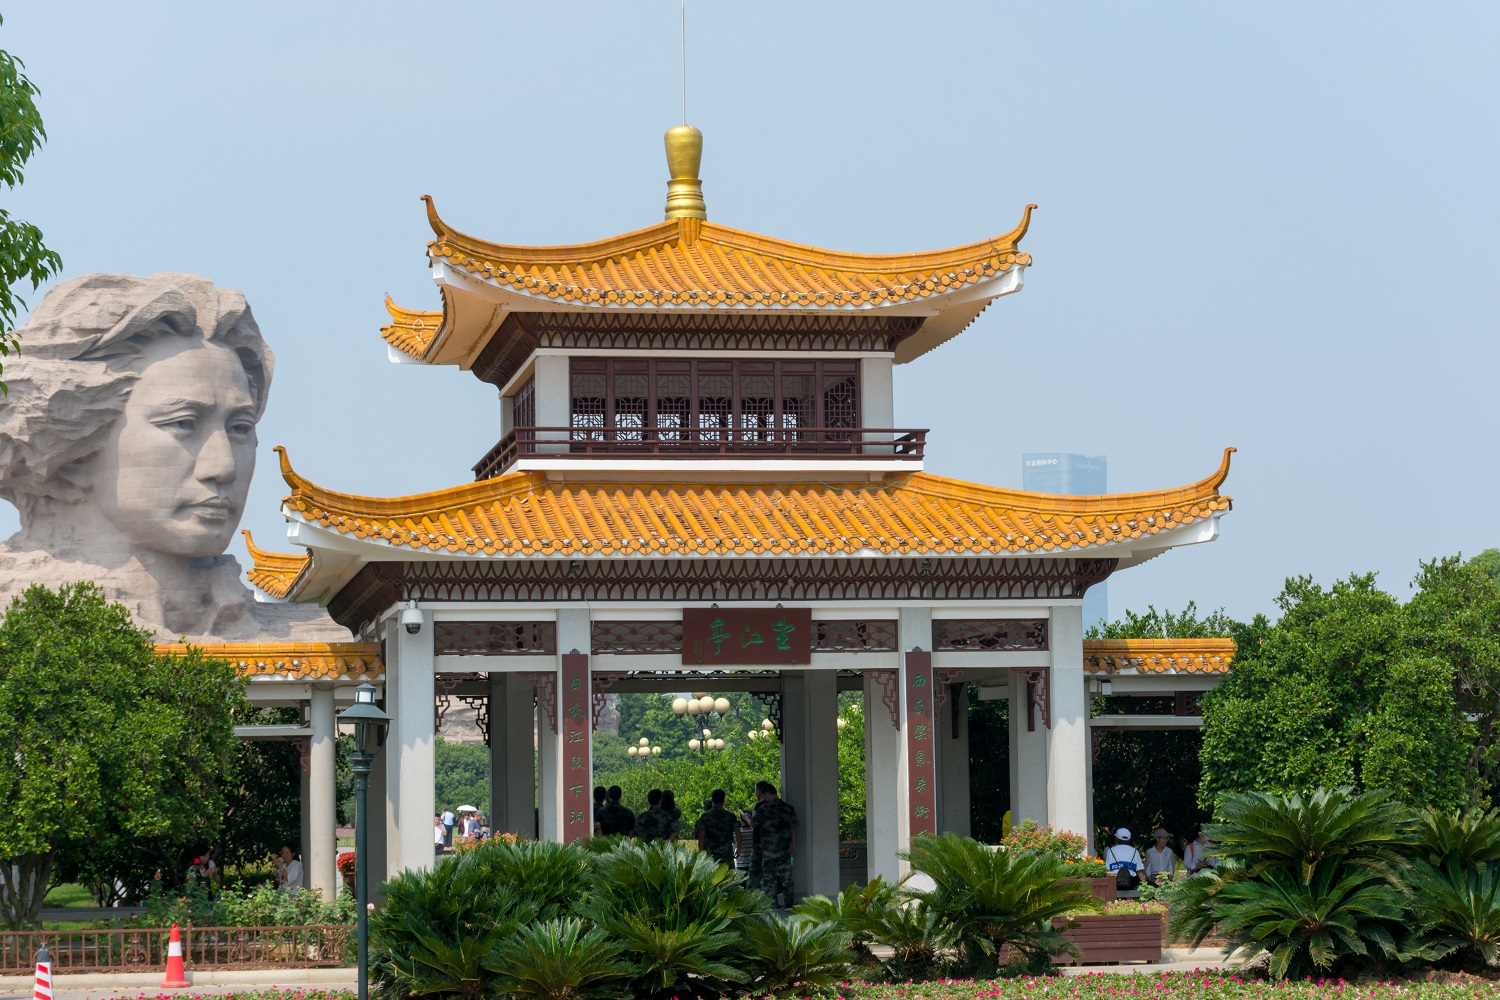 A pavilion and a statue of Mao Zedong in Changsha, China’s Juzhou Park.